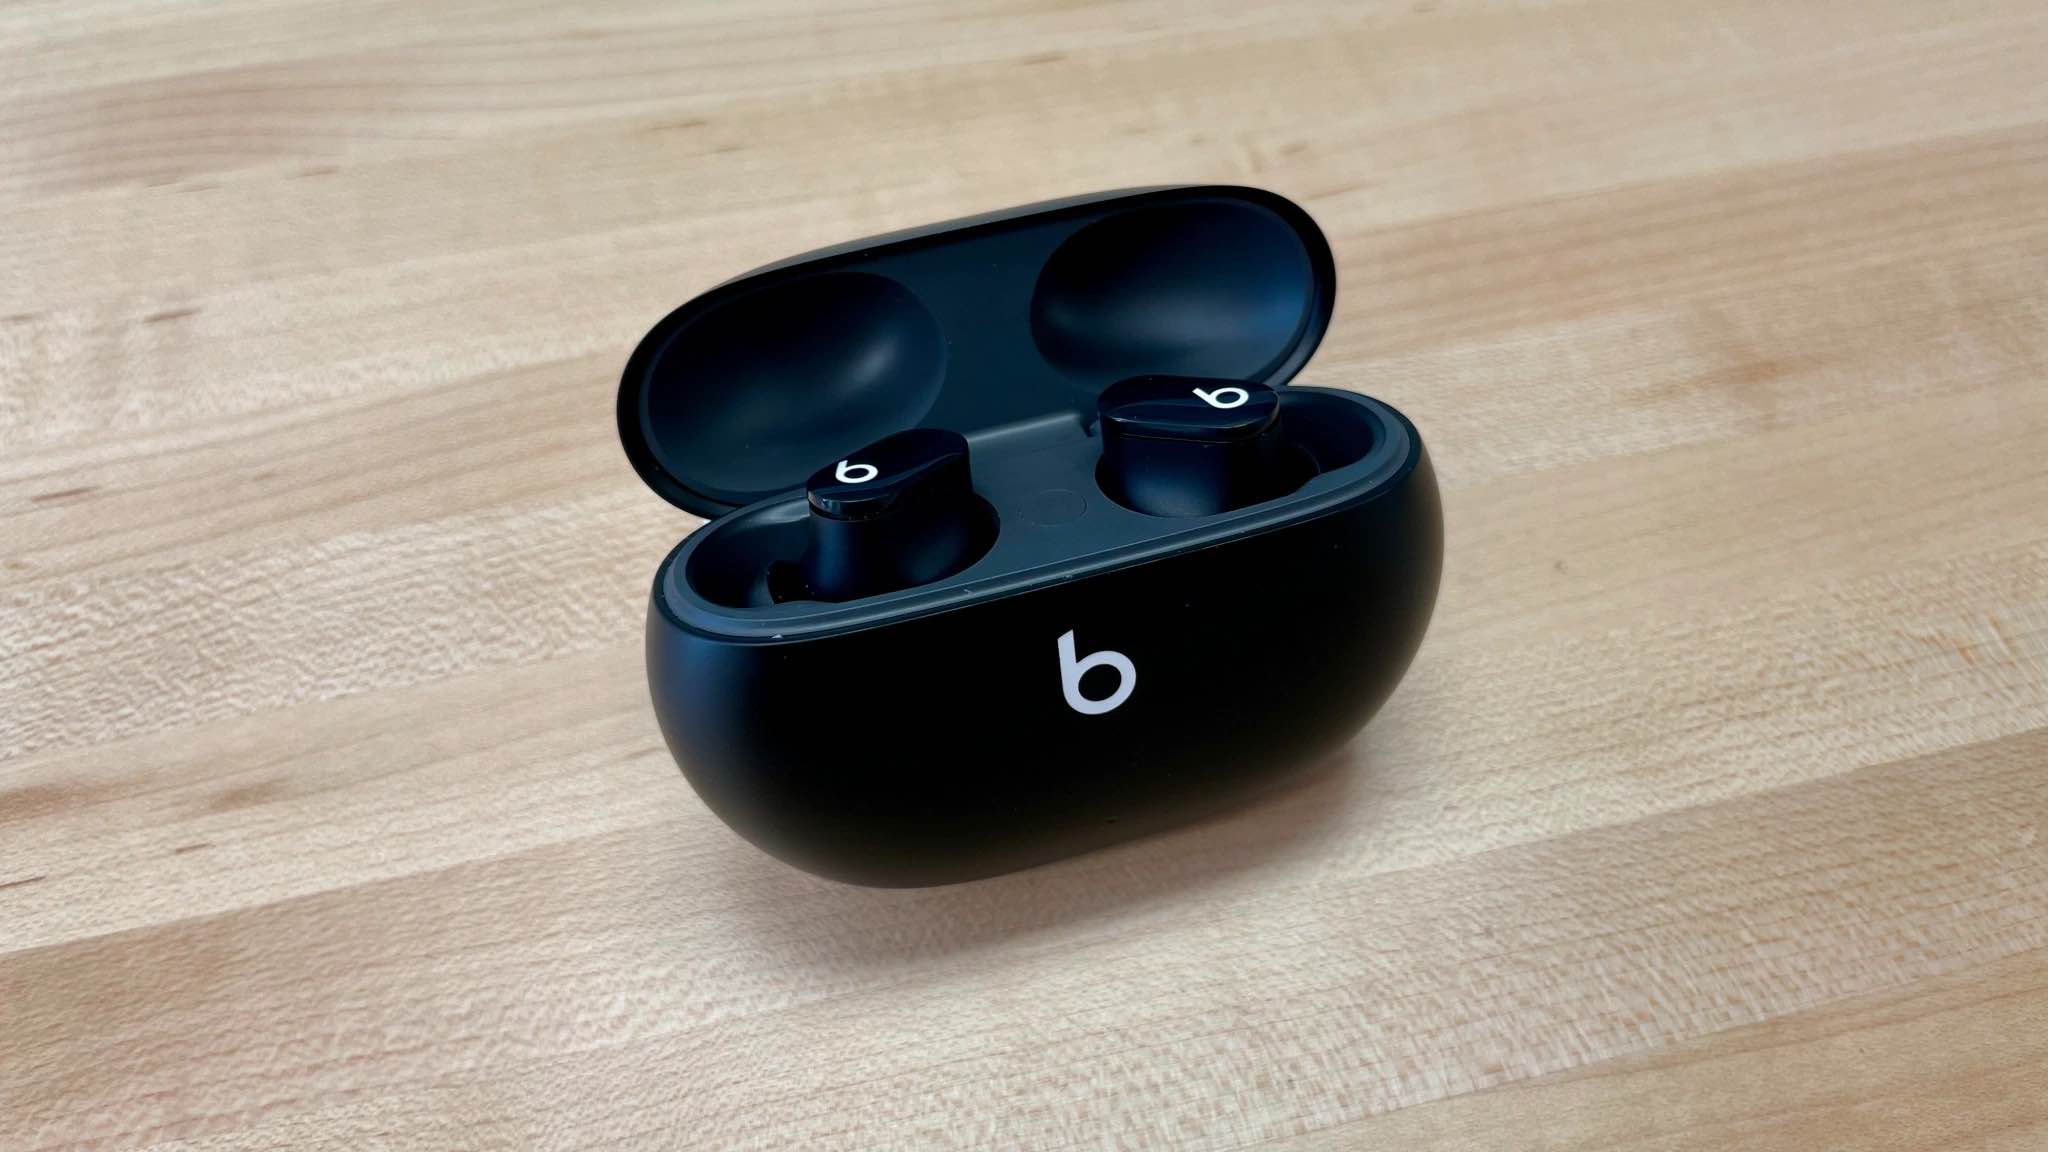 Beats Studio Buds see first deal to $135, more - 9to5Mac